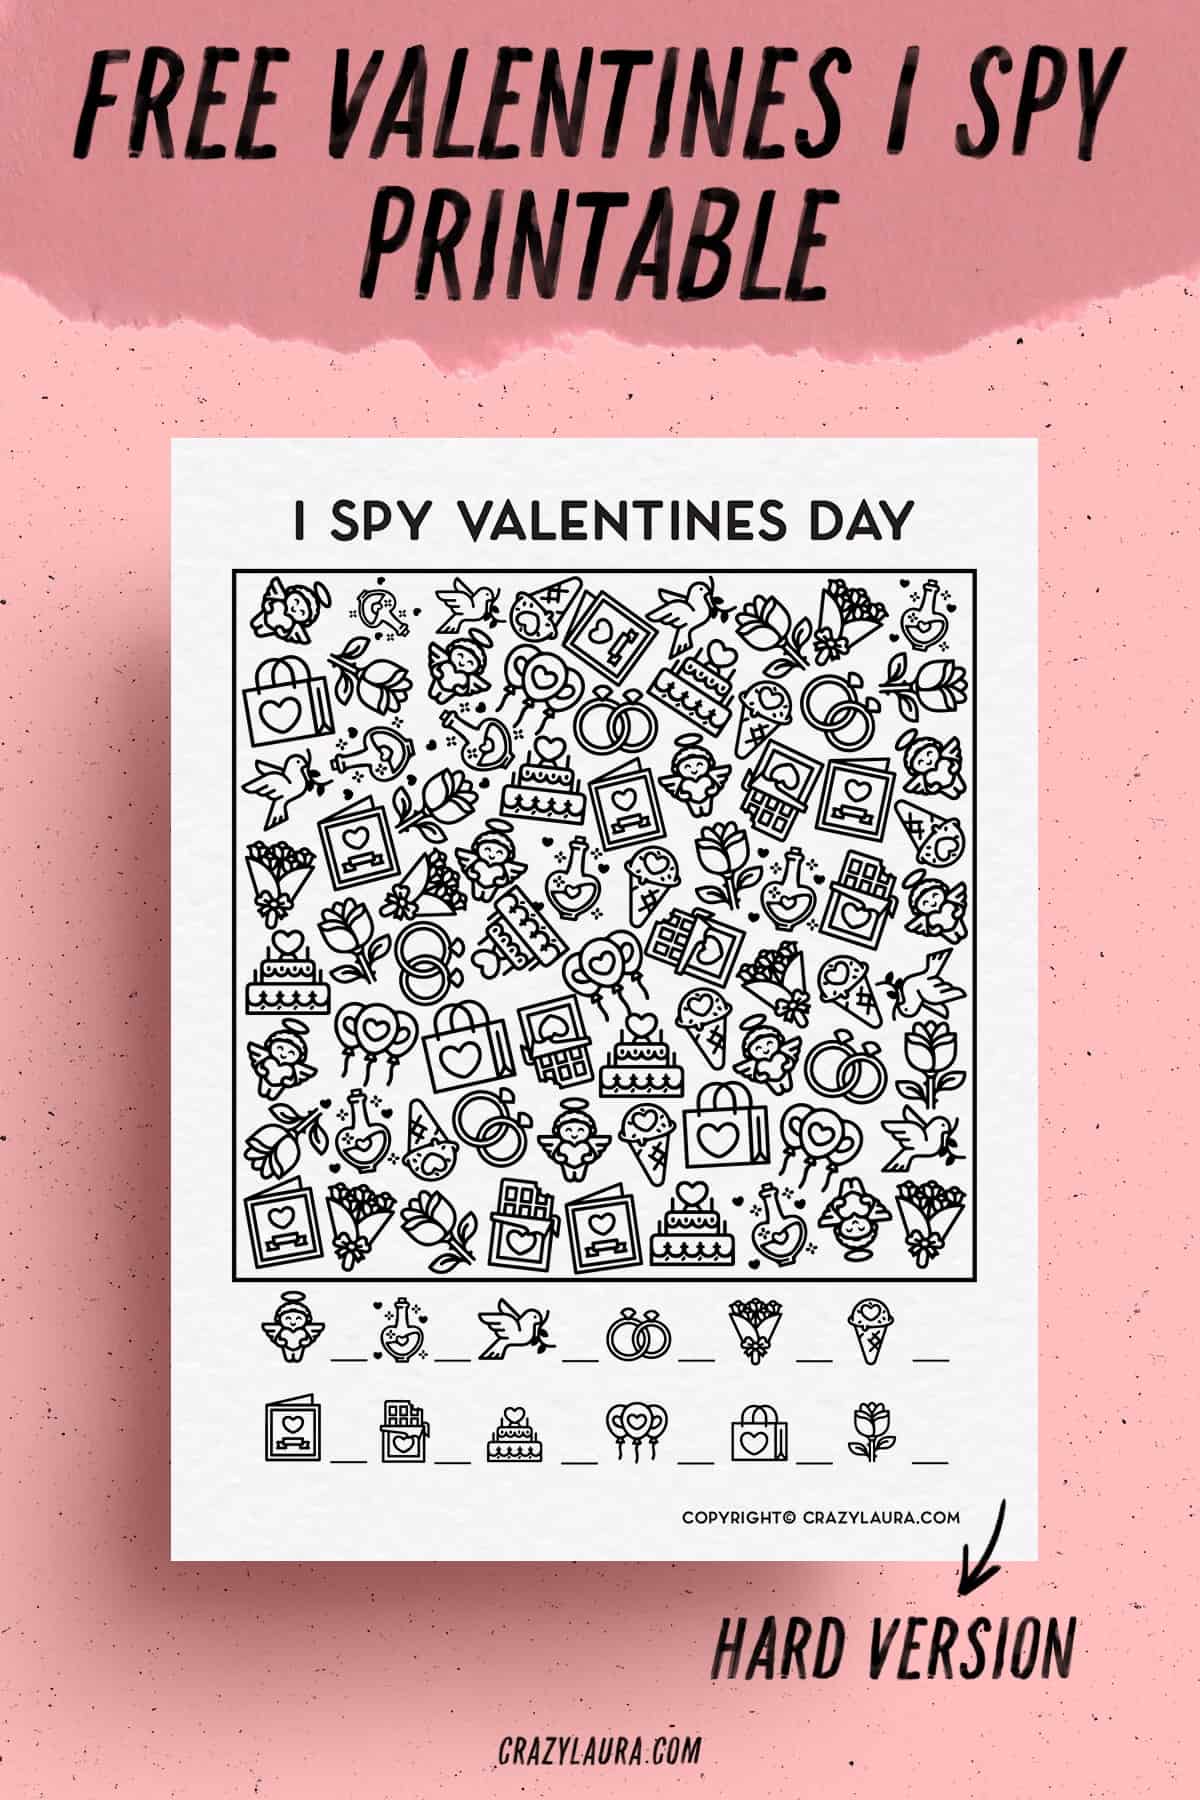 i spy game free for printing